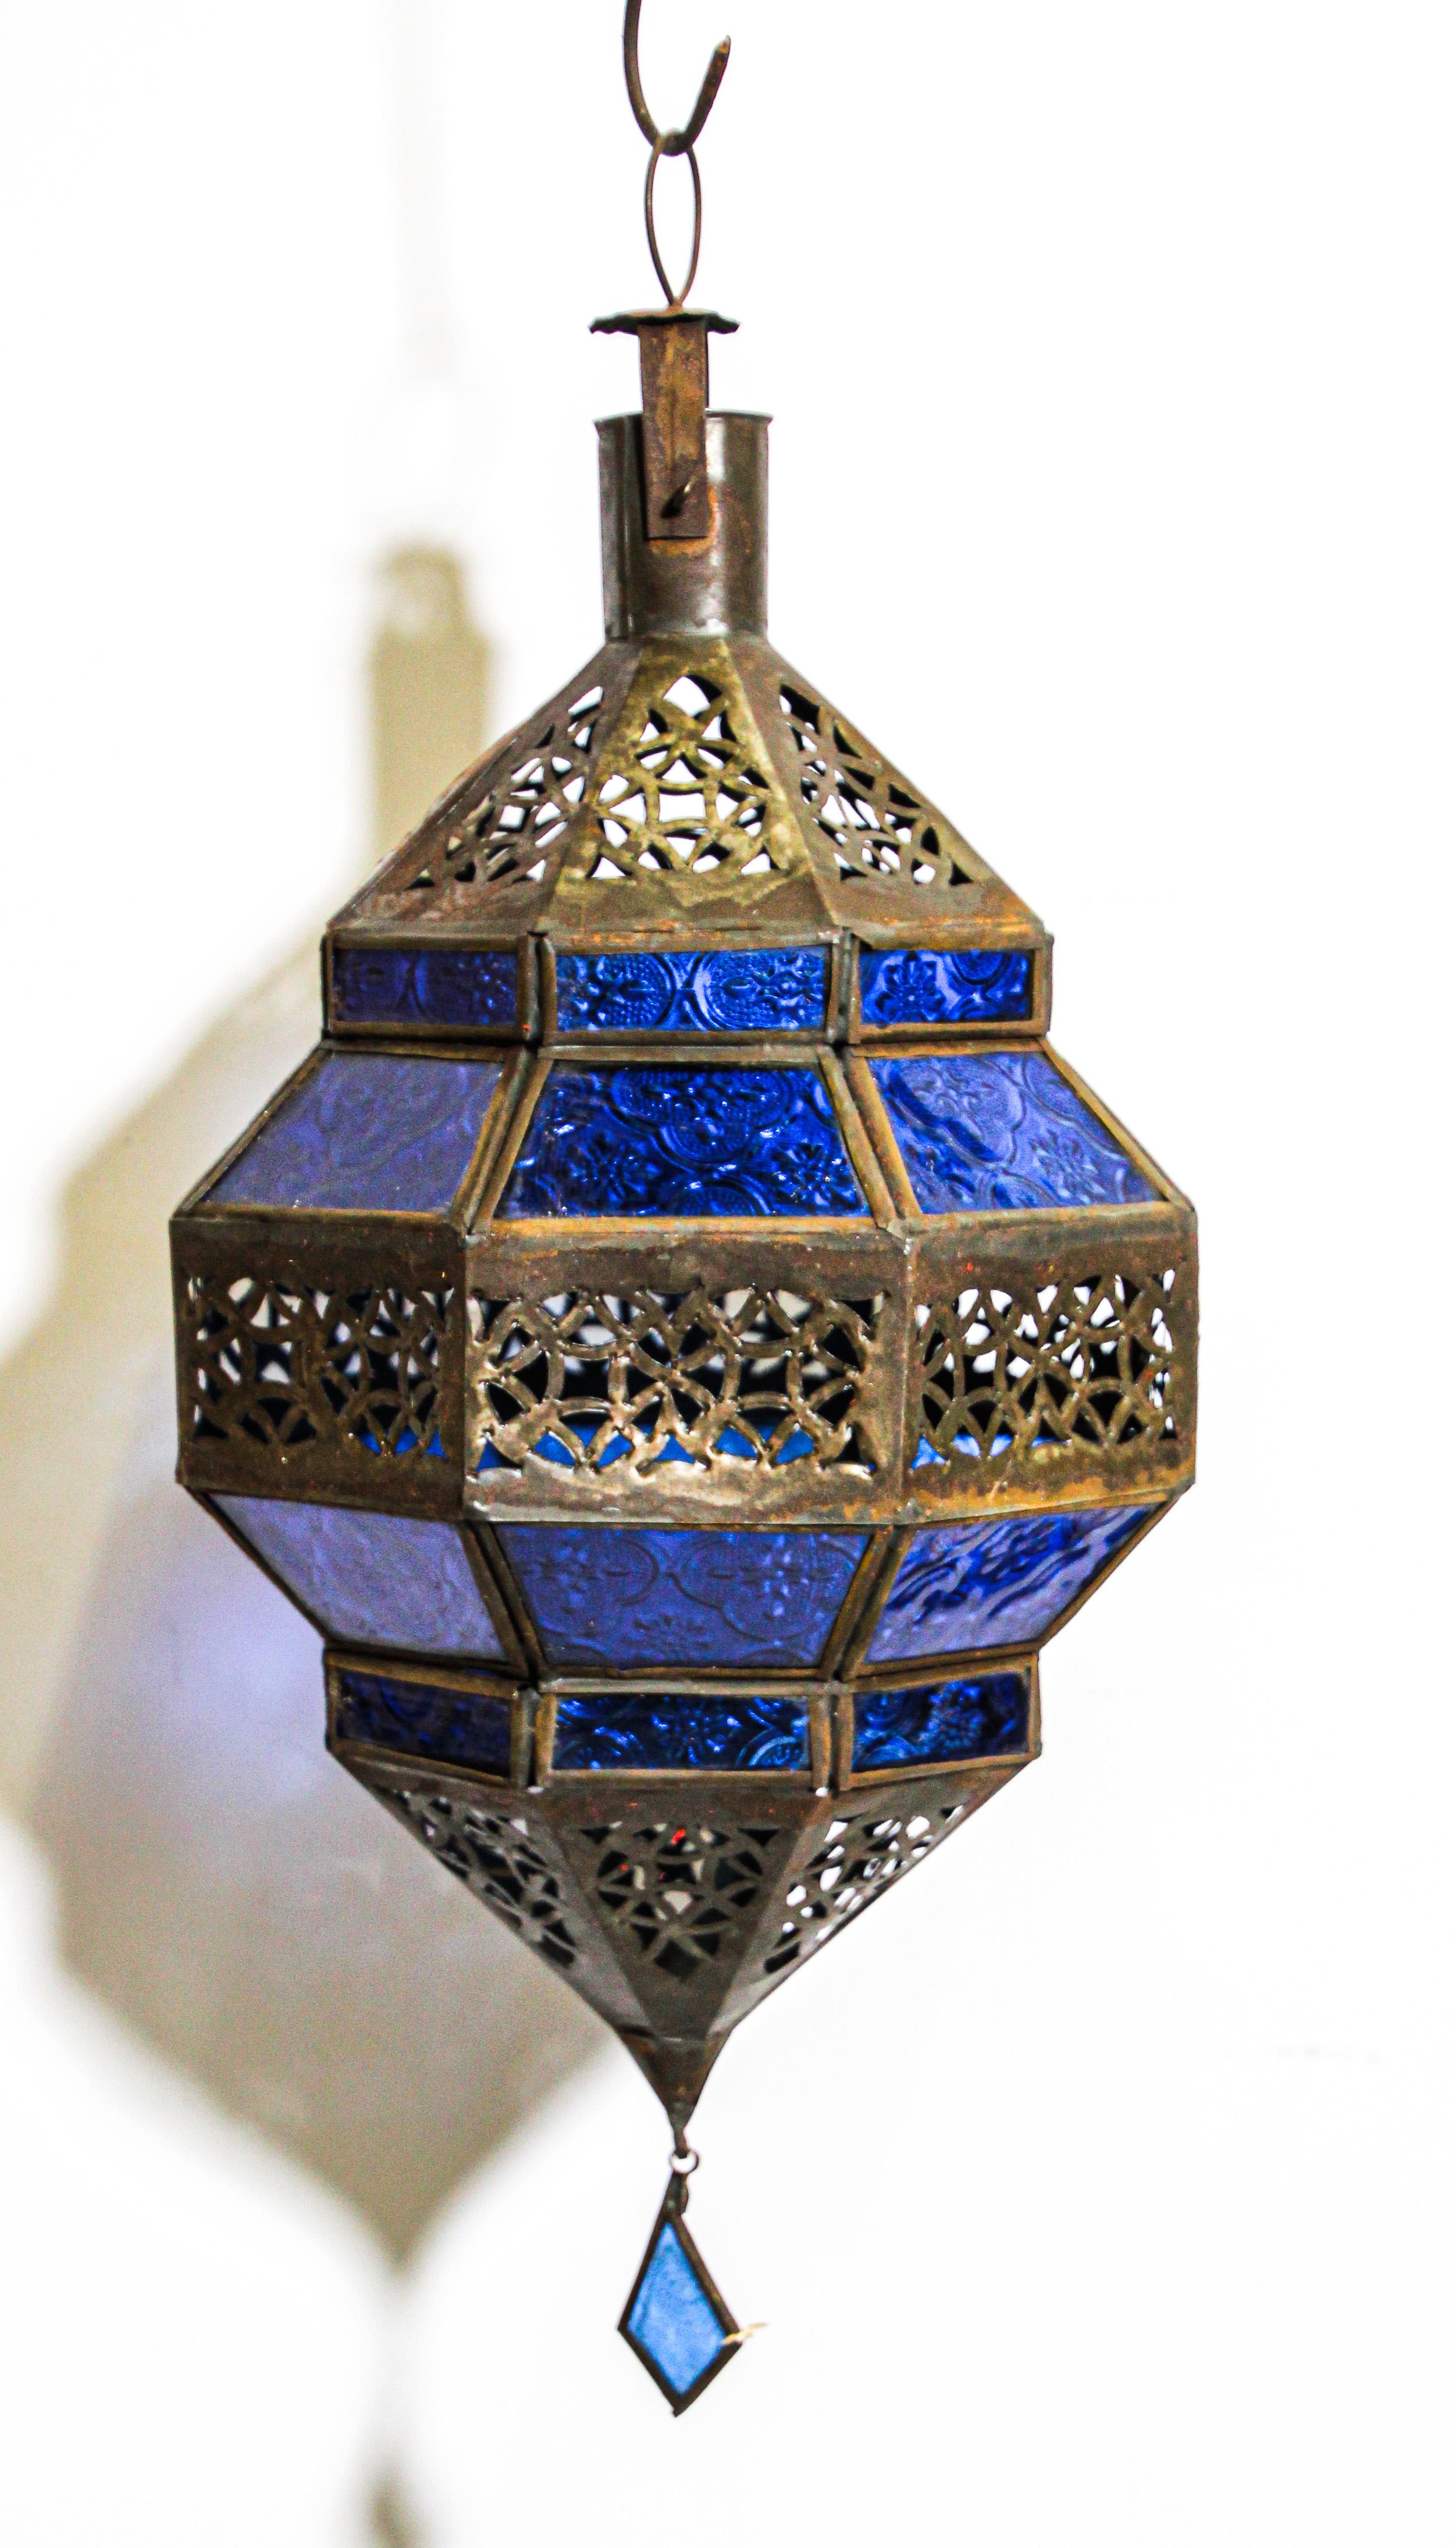 Moroccan metal and blue glass lantern in diamond shape. Moroccan lantern in octagonal shape with rust color metal finish and blue glass. The top and bottom with open metal work Moorish design. This Moroccan lantern when lit will cast light on the